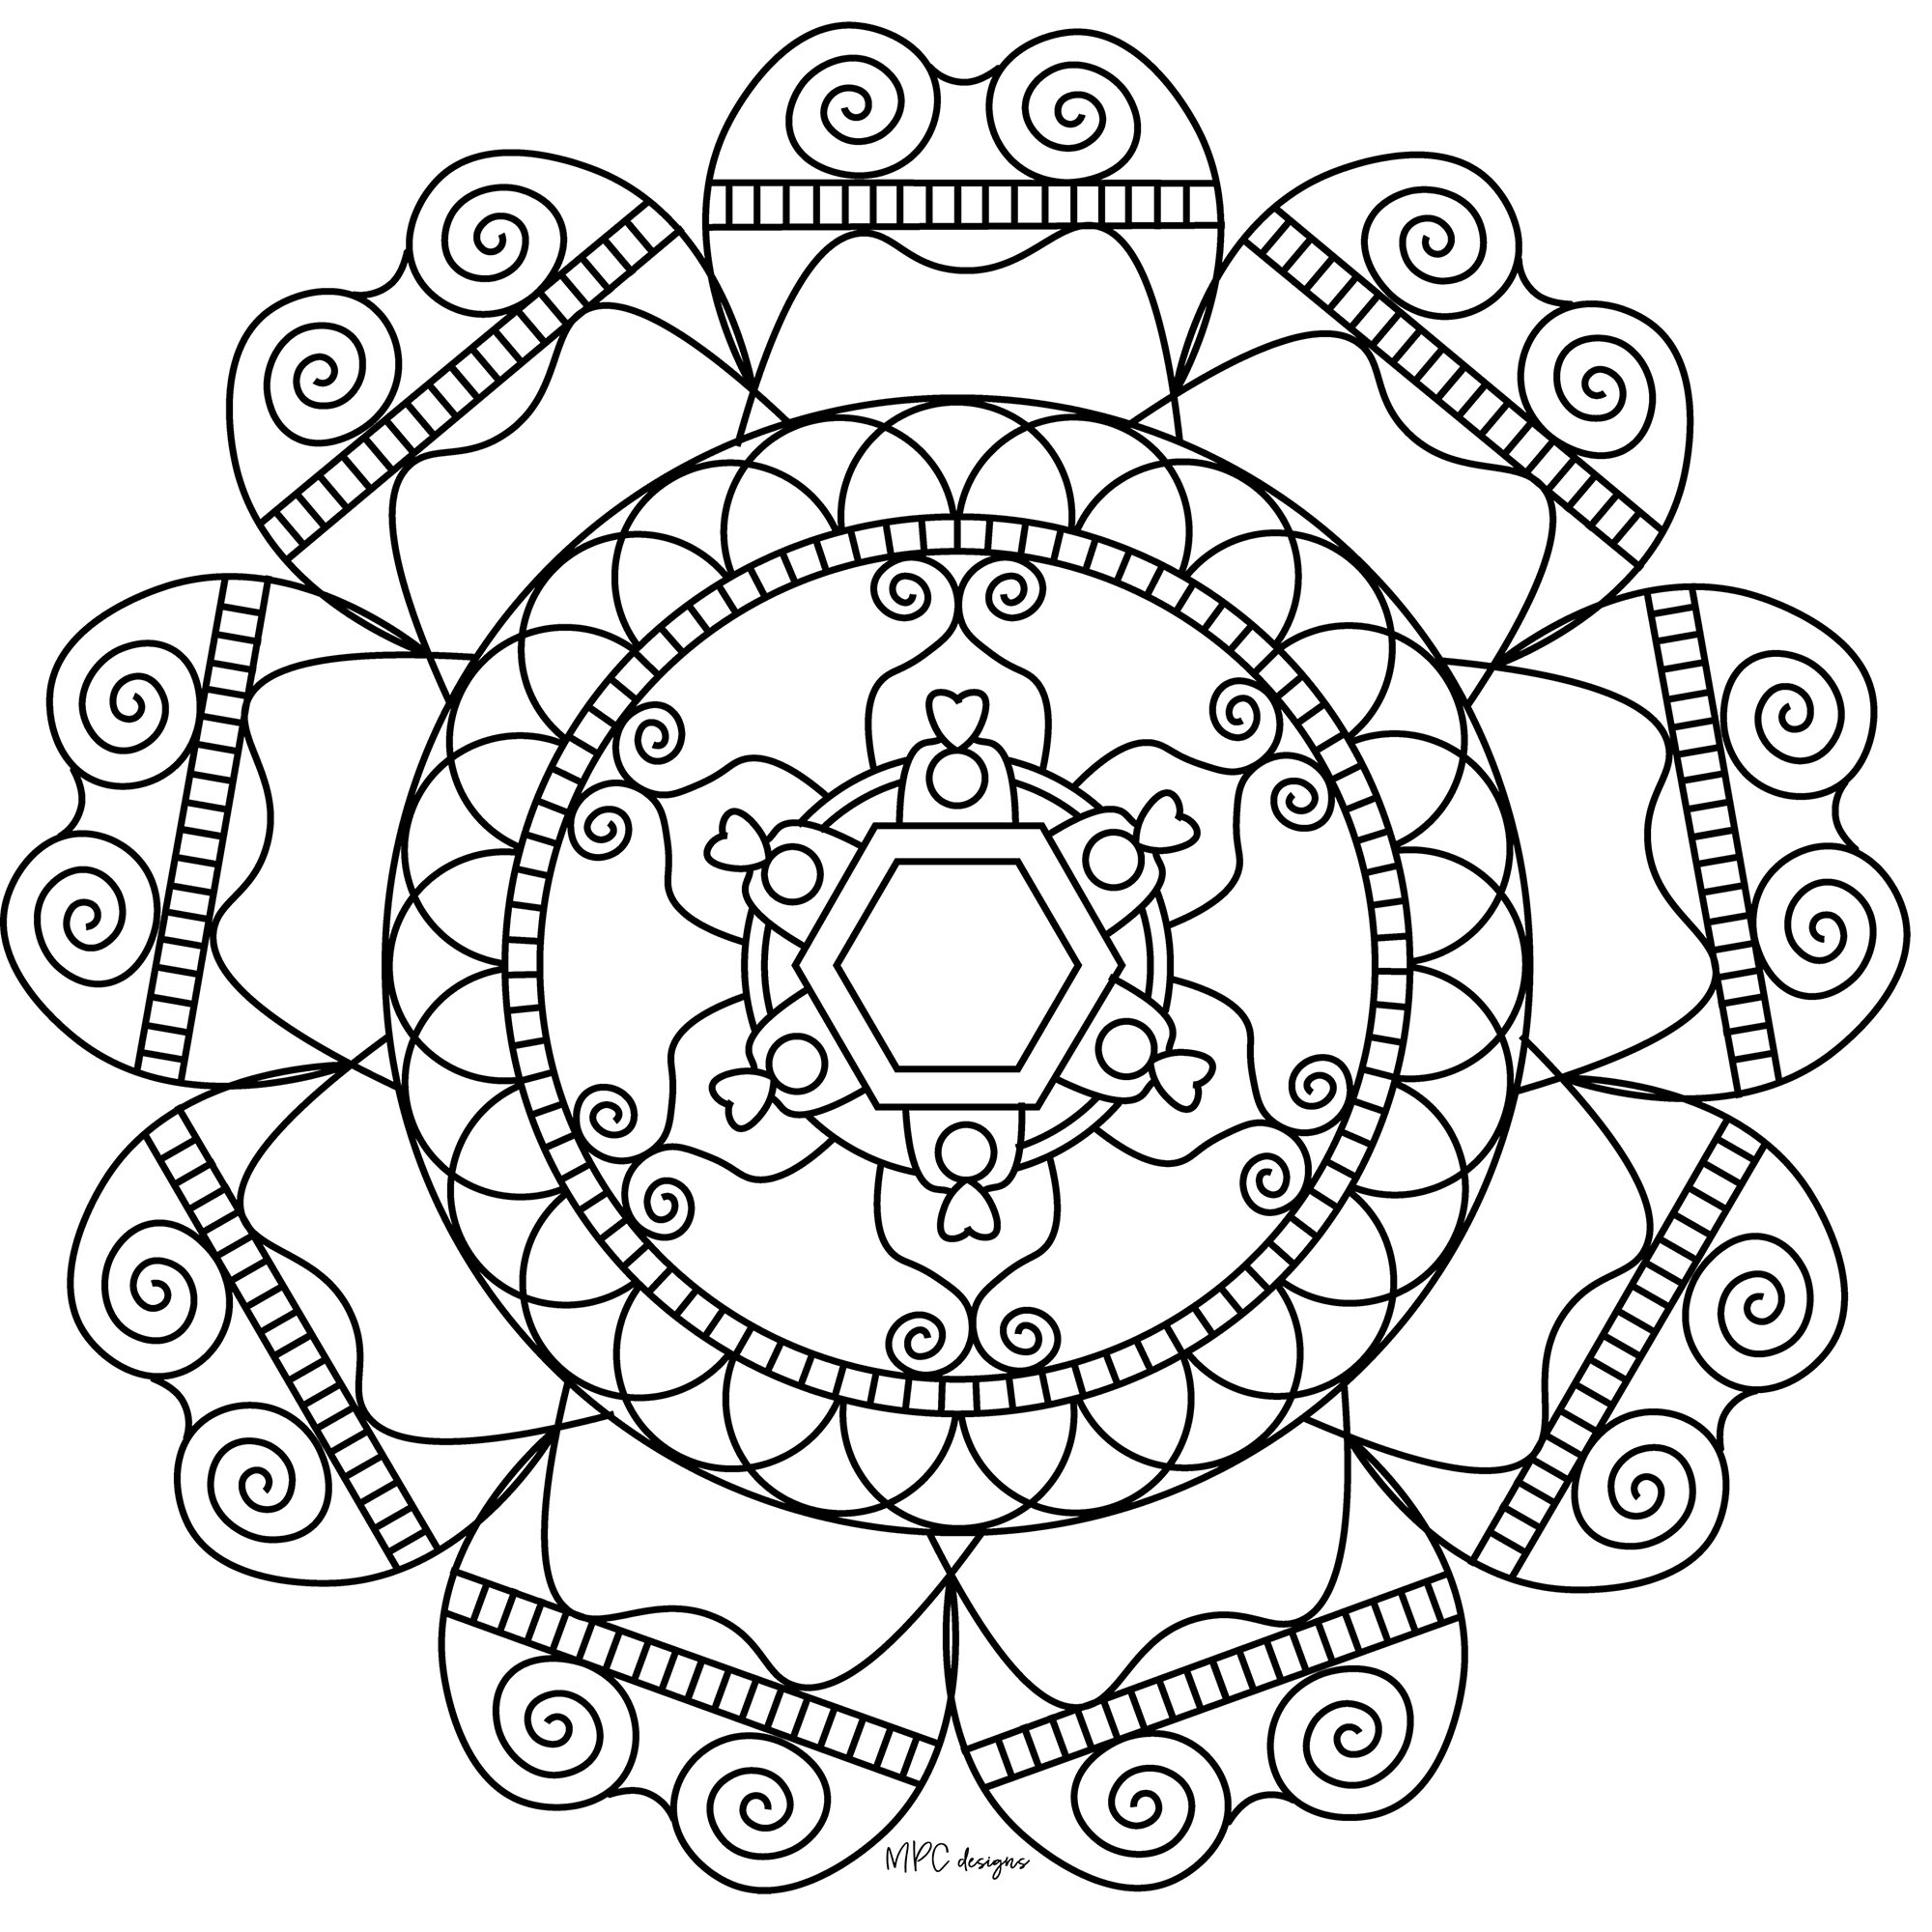 A Mandala guaranteed 100% Zen, for a moment of pure relaxation. Do whatever it takes to get rid of any distractions that may interfere with your coloring.